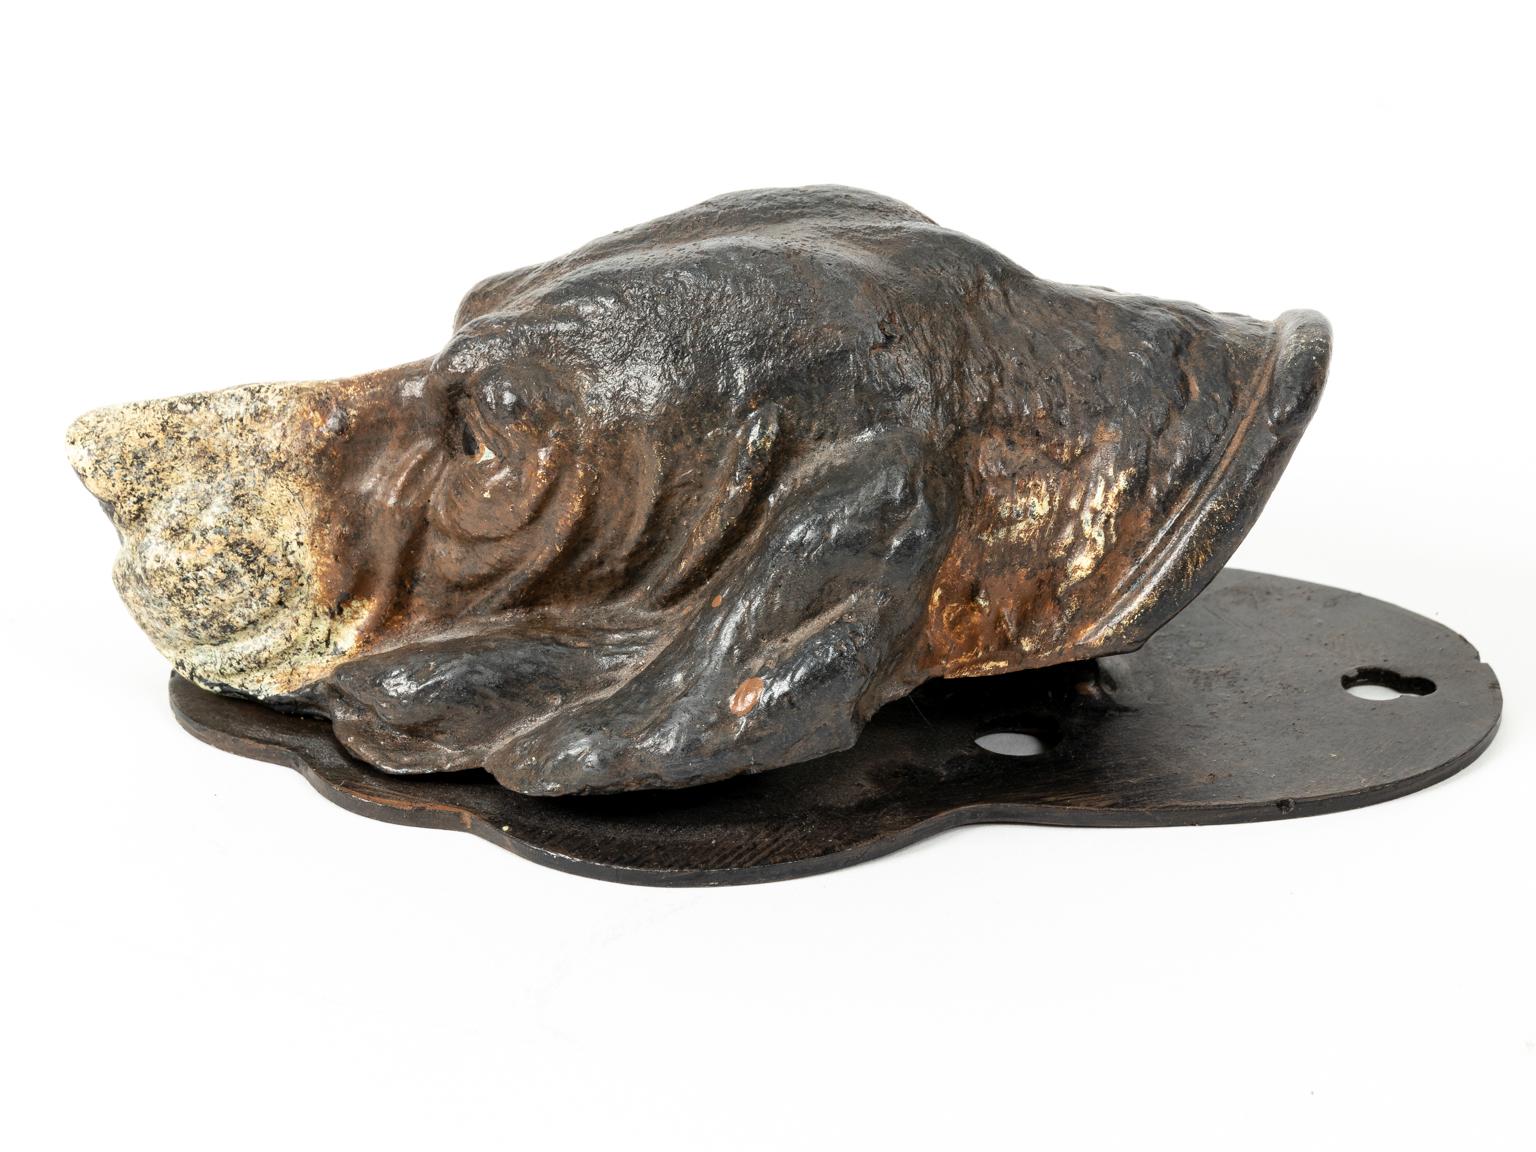 Circa early 20th century desk wall art clip or bill holder. The piece is composed of cast iron in the shape of a hound dog with original patina and no structural damage. Particular decorative detail includes painted eyes and nose. Please note wear